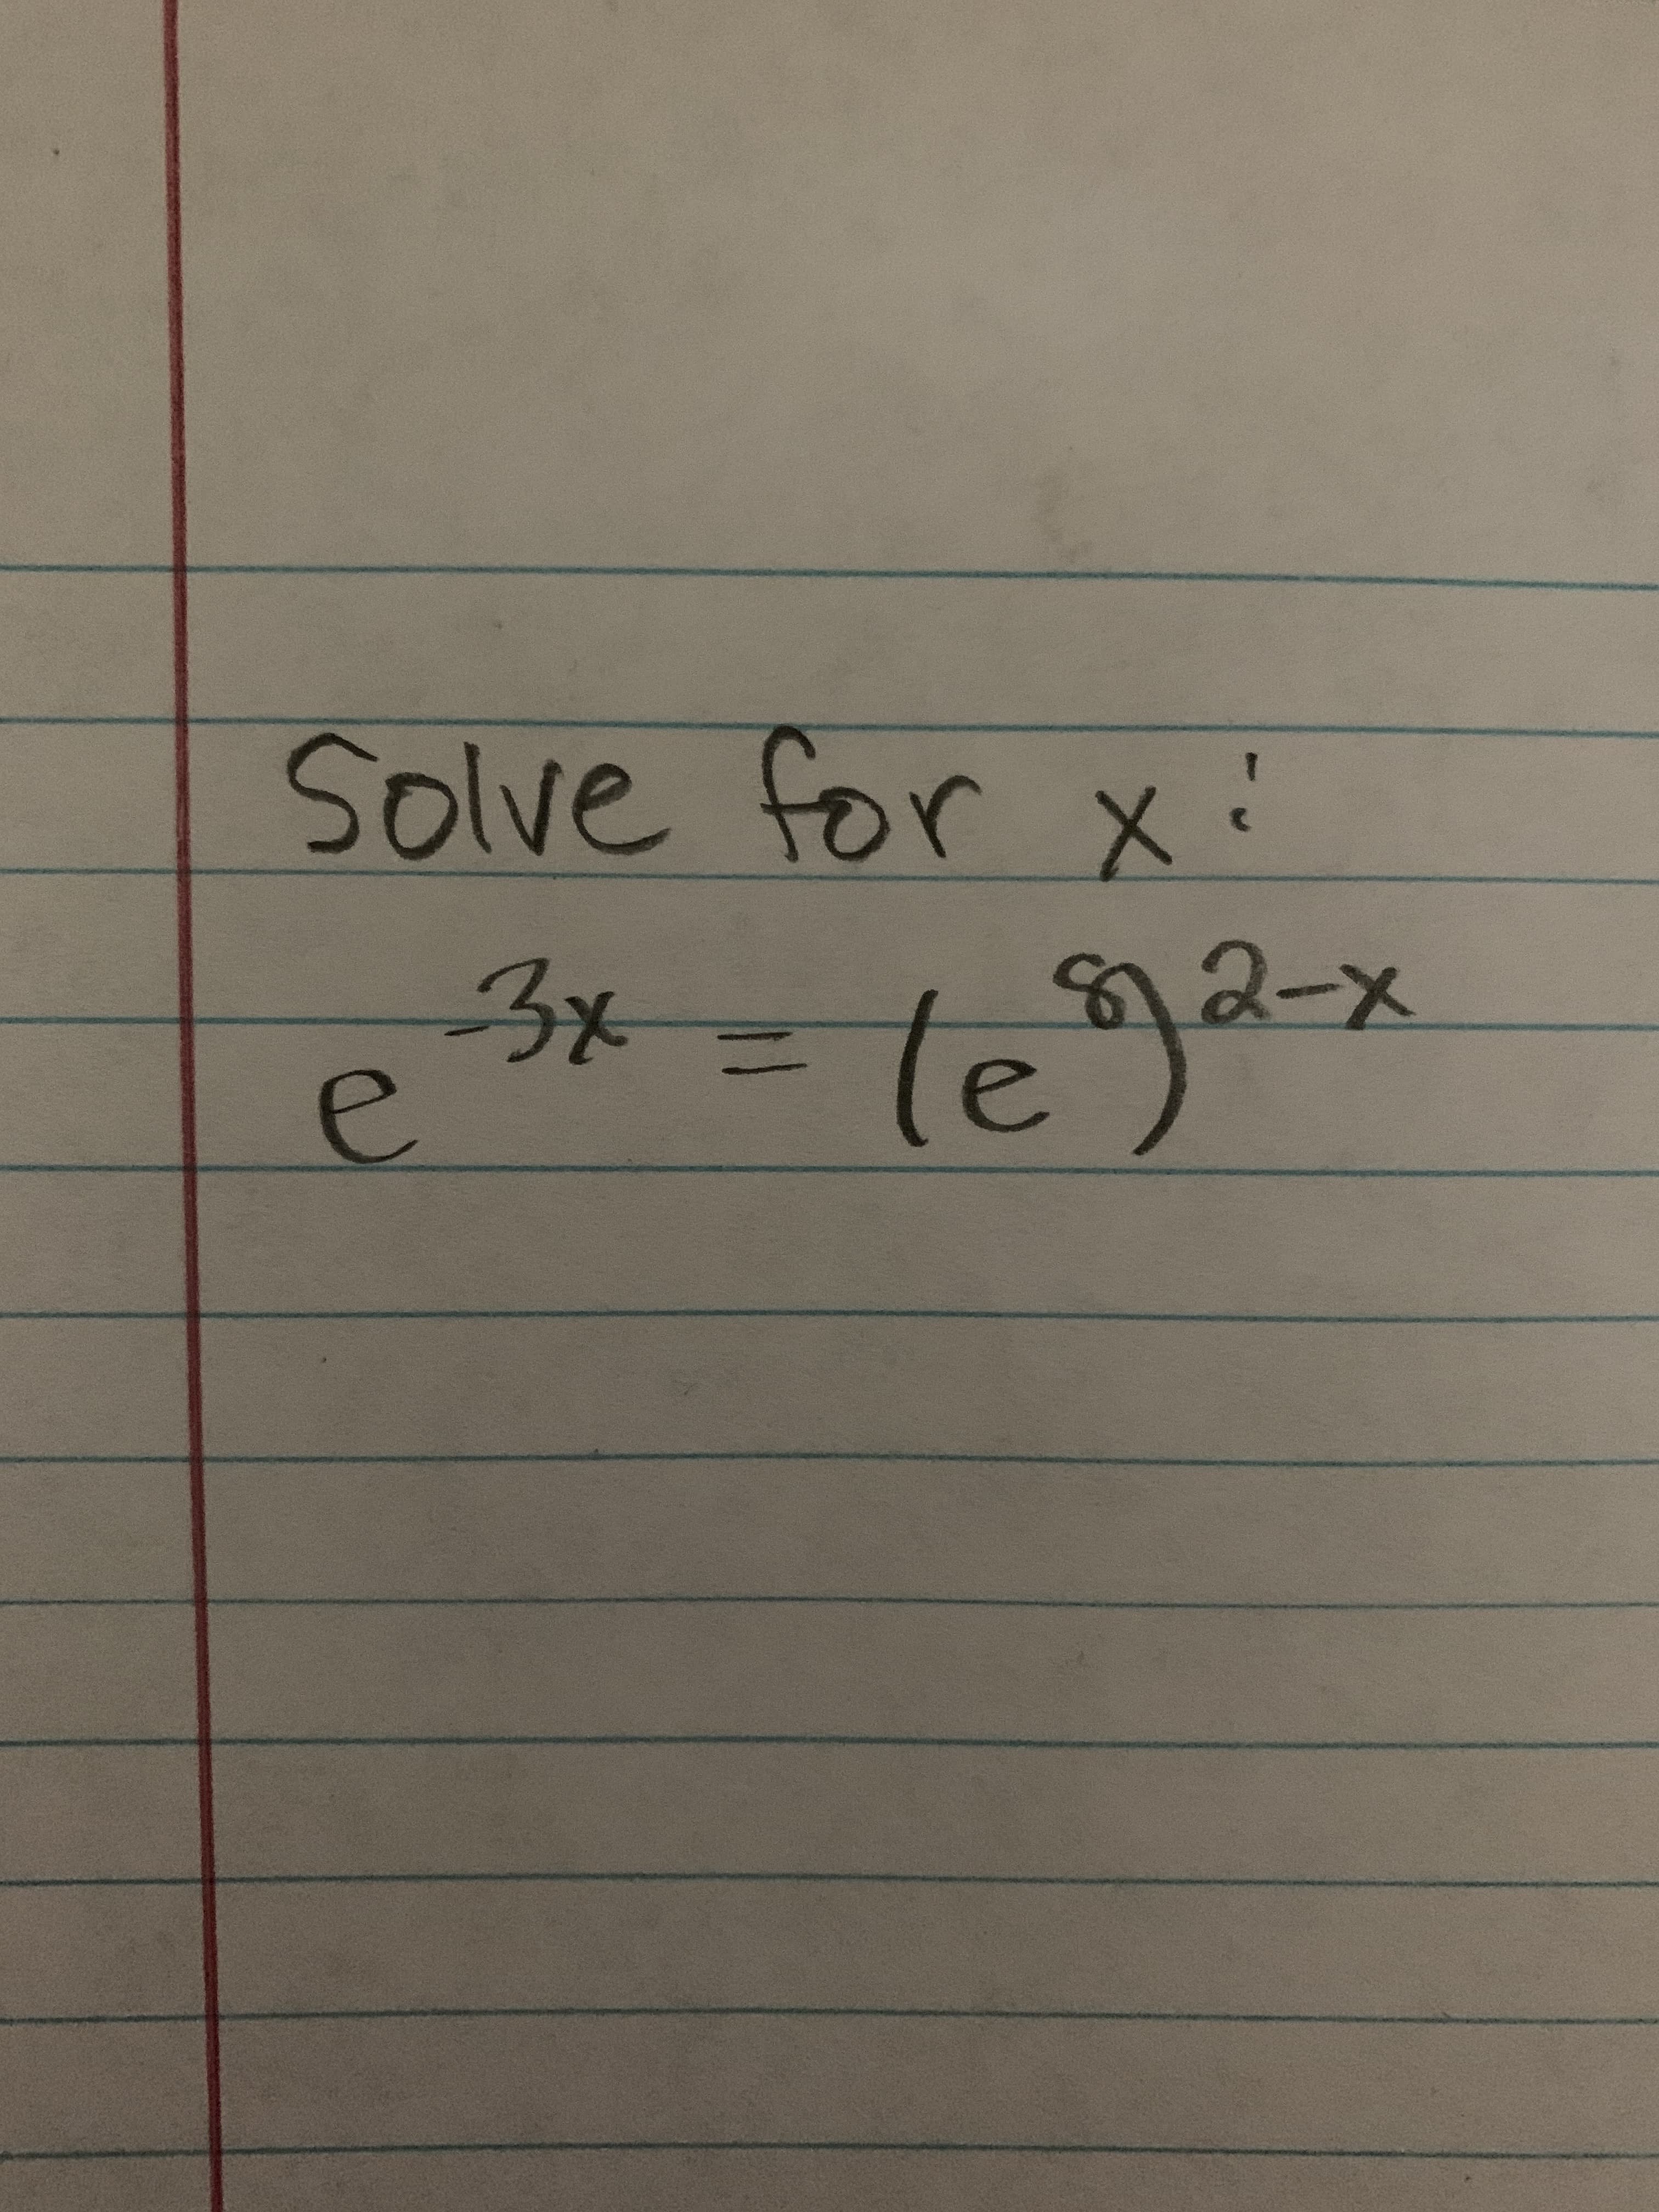 Solve for x:
3x
te
